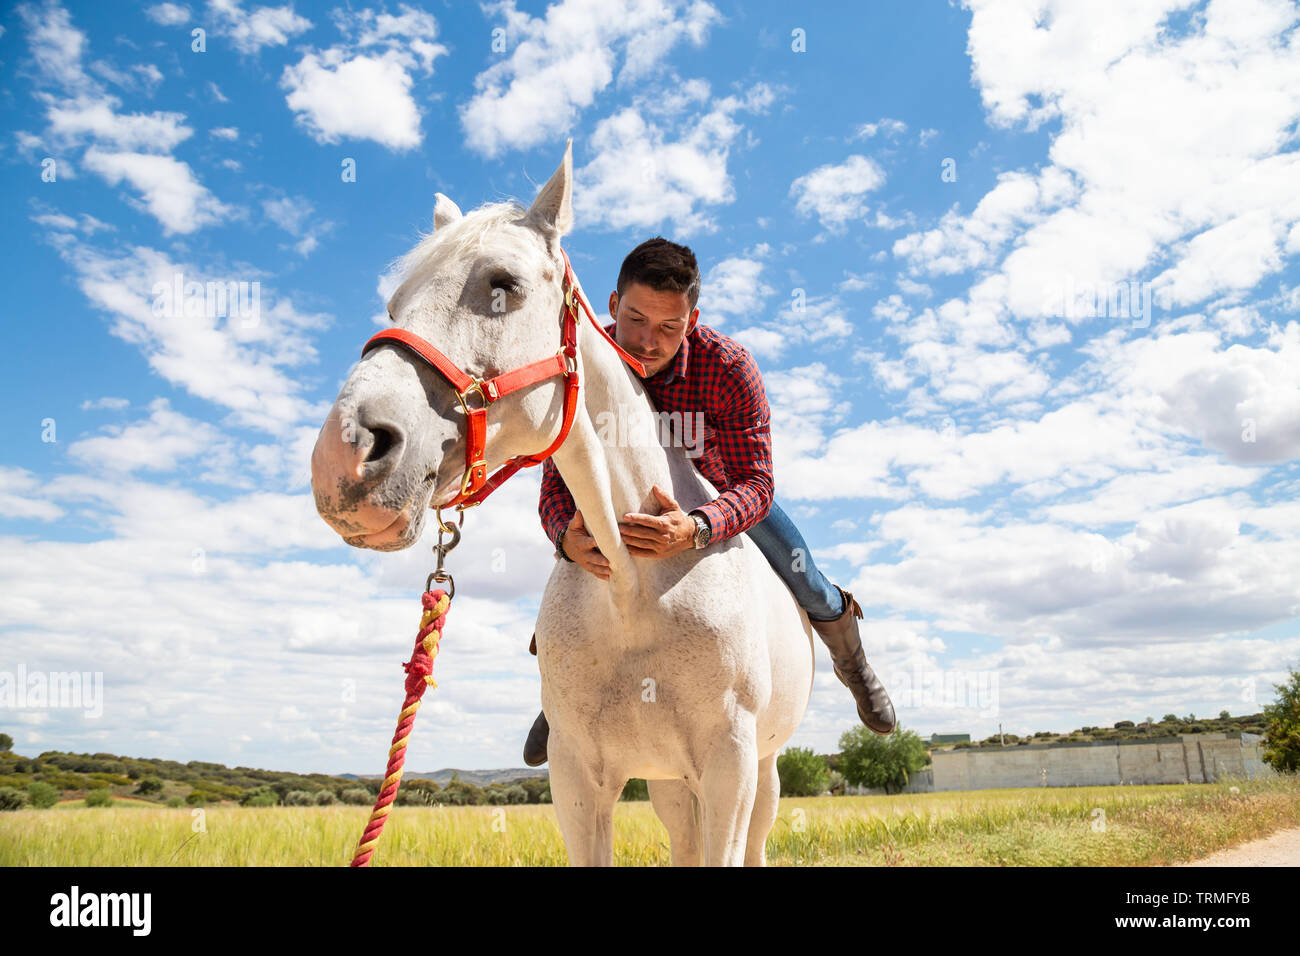 Excited young guy in casual outfit smiling and embracing neck of white horse during ride in field on cloudy day Stock Photo